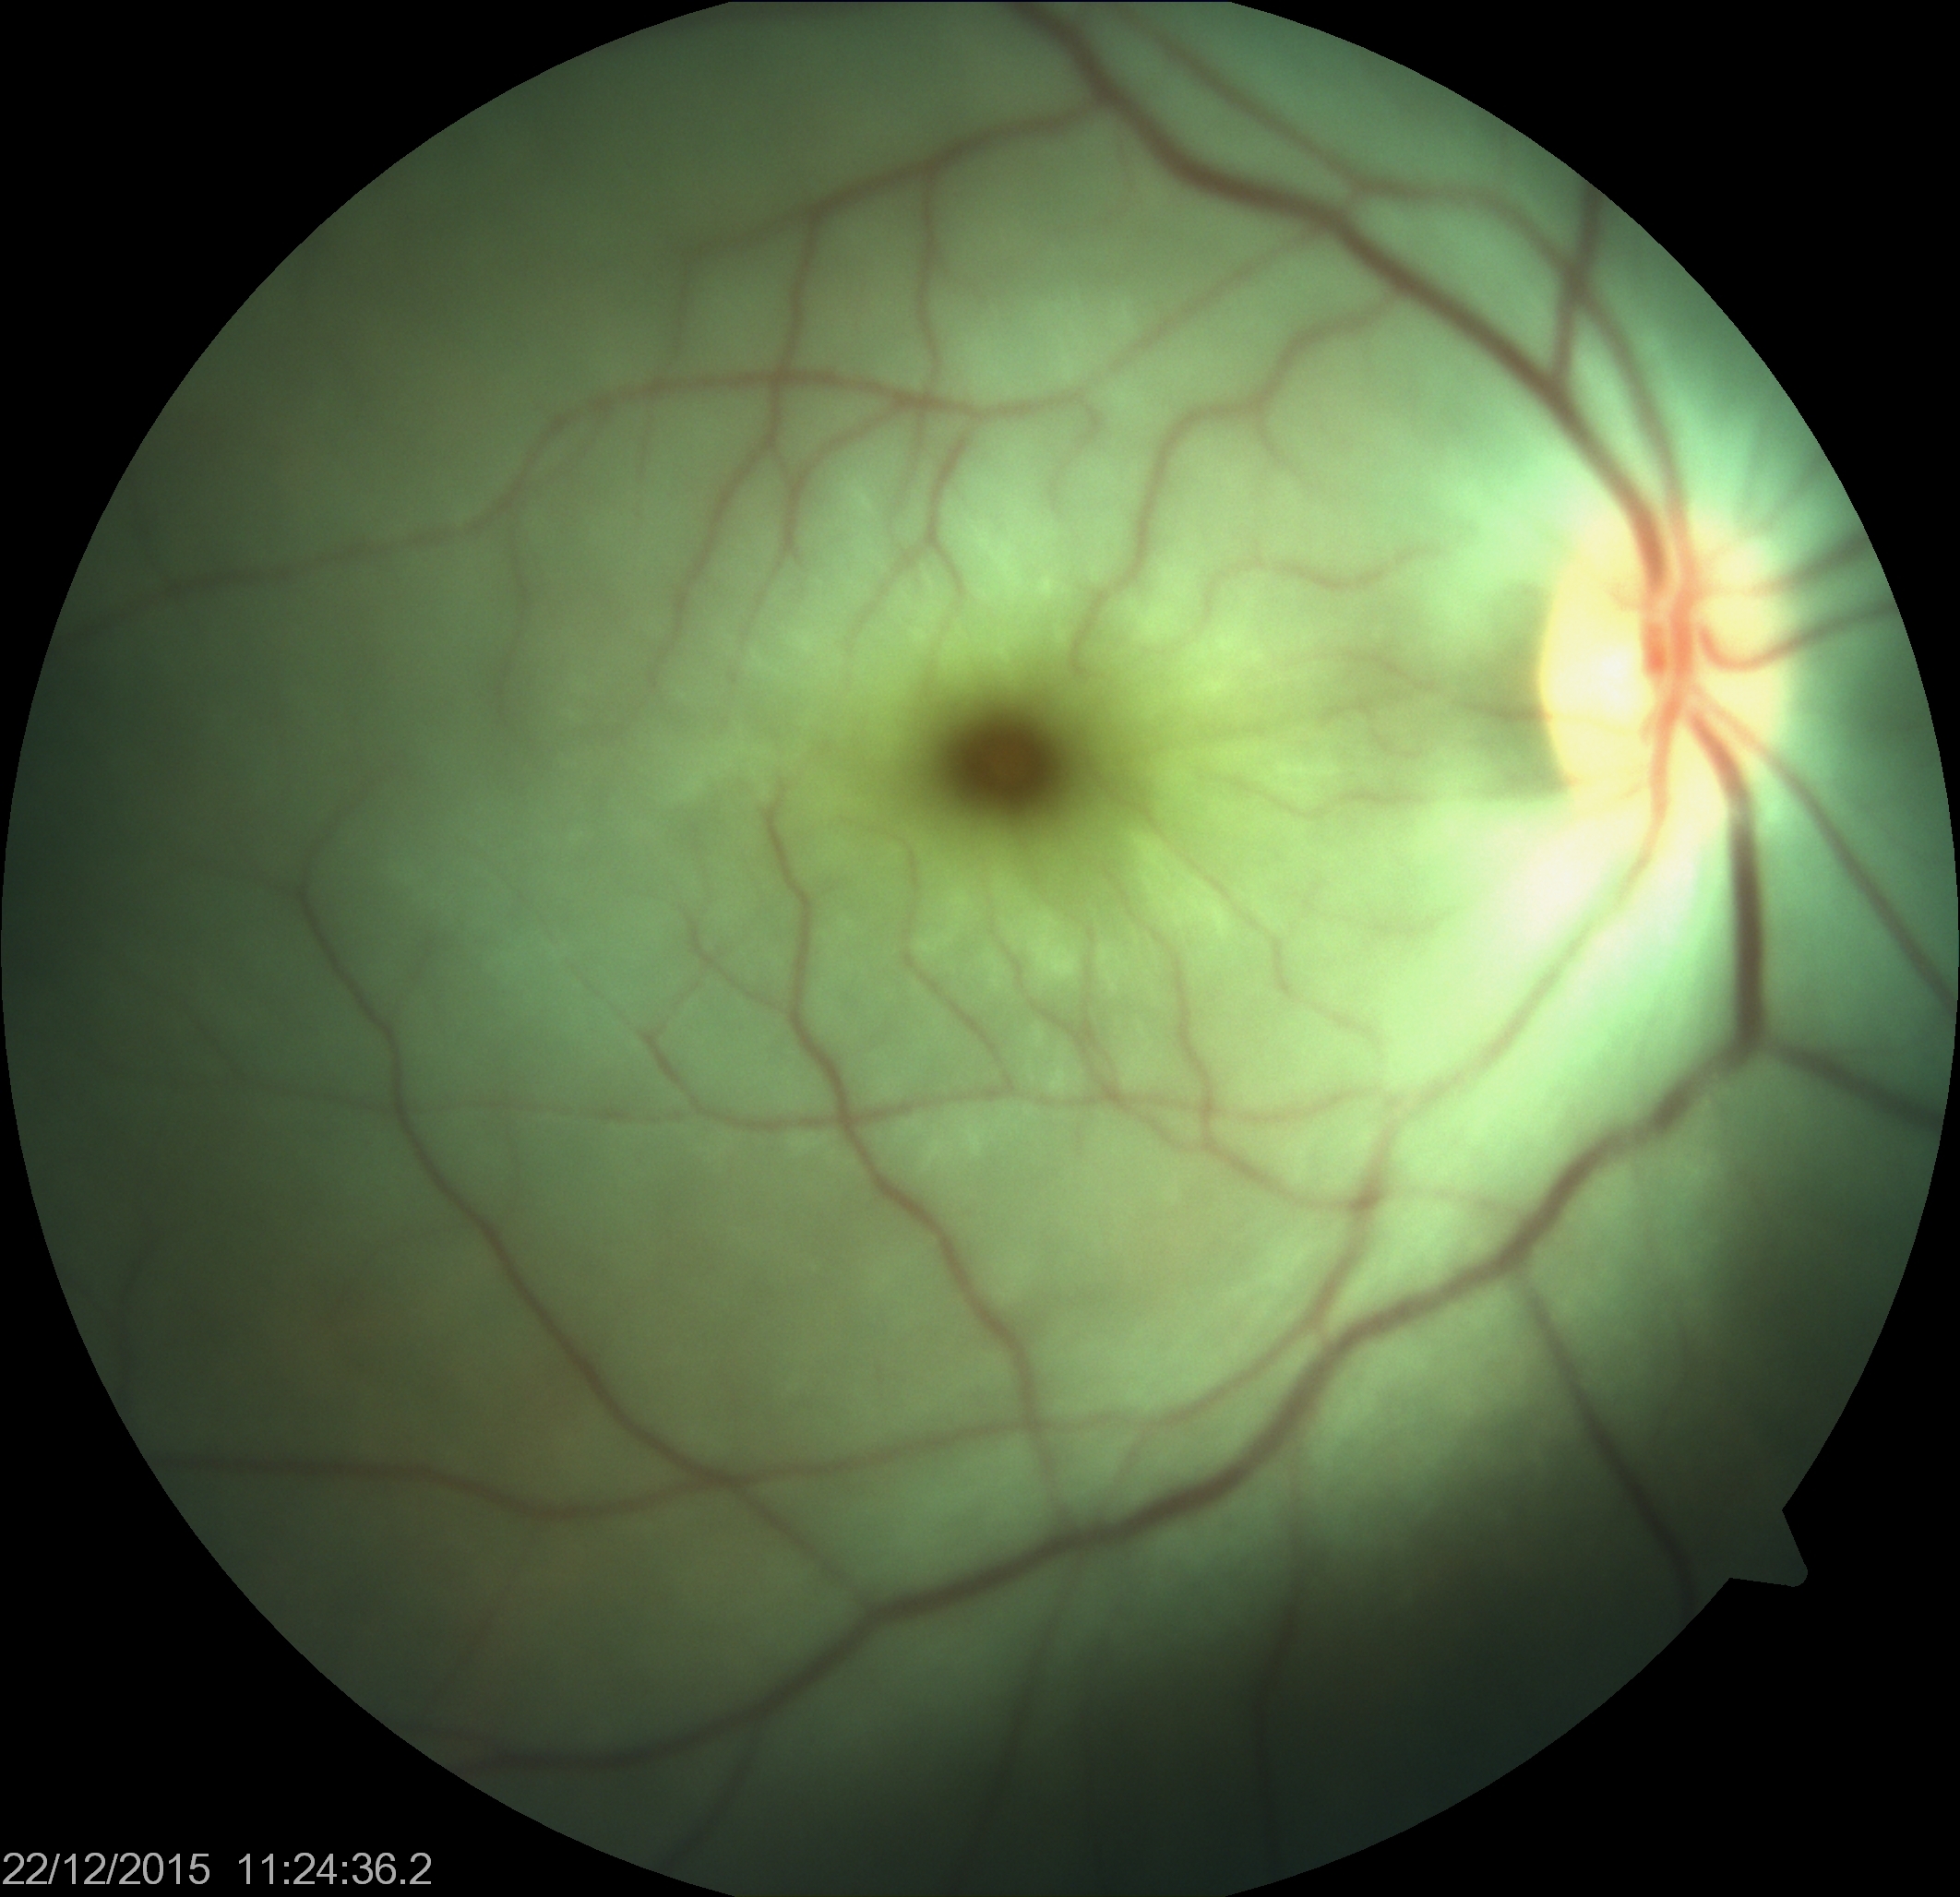 Central Retinal Arterial Occlusion- right eye